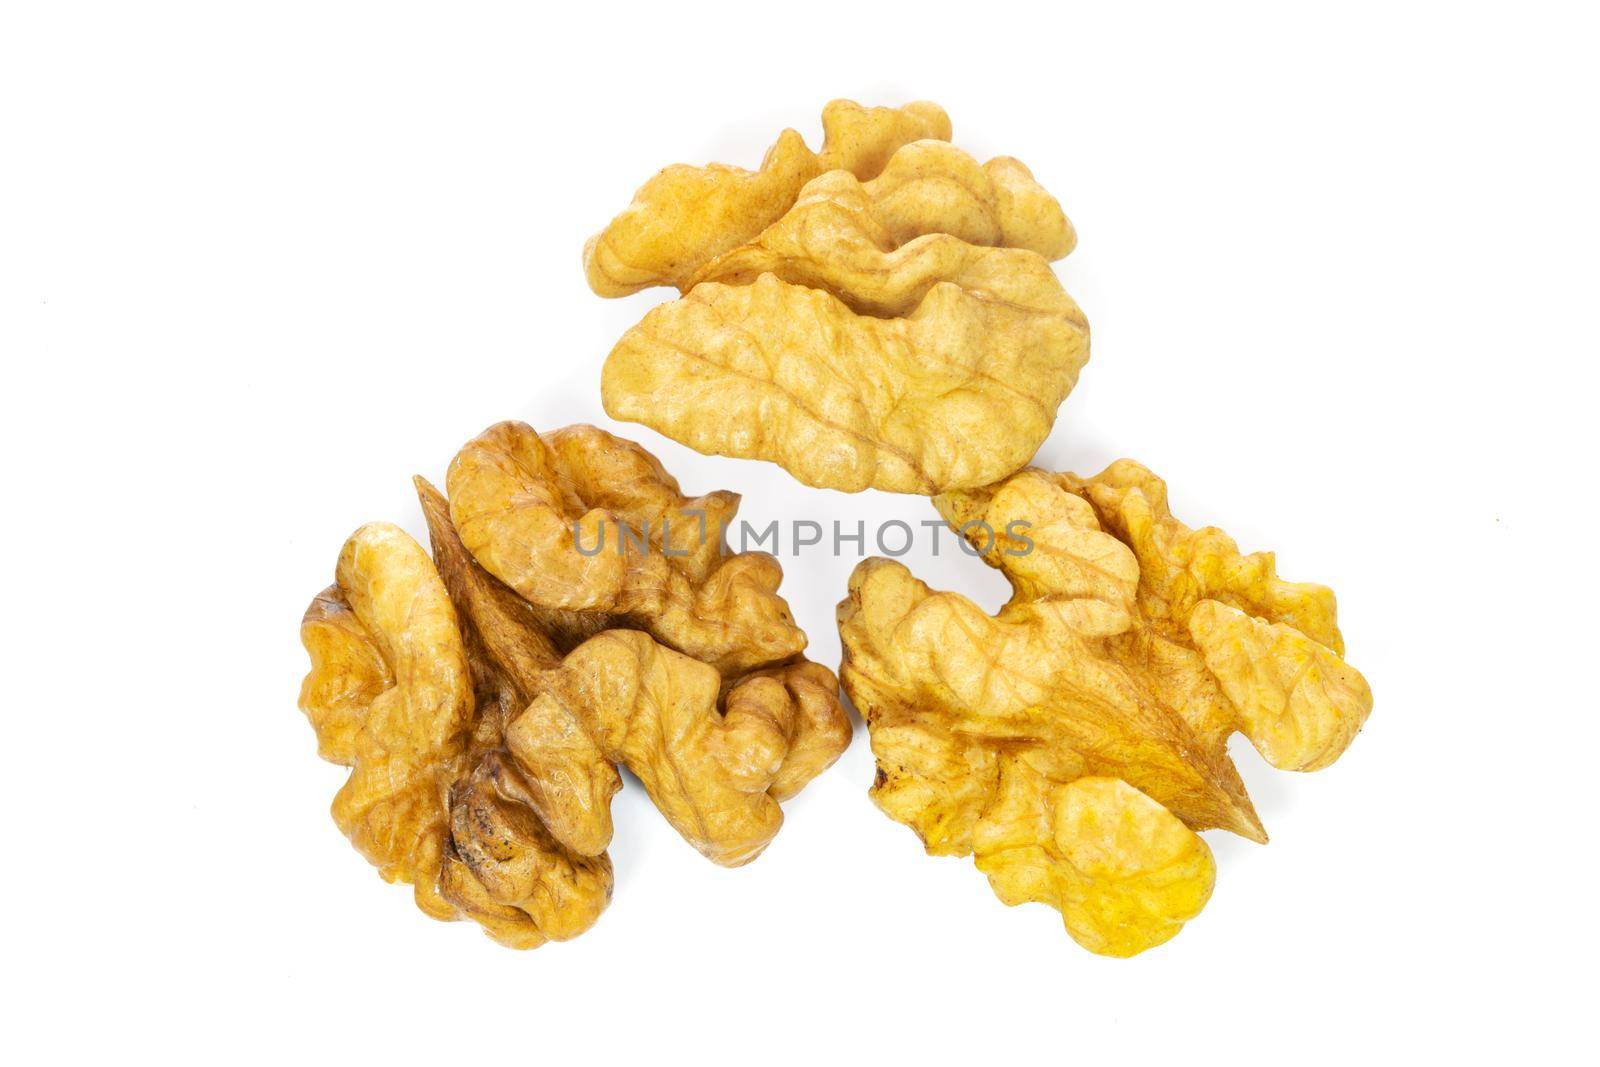 Top view of dry and shelled walnuts isolated on a white background